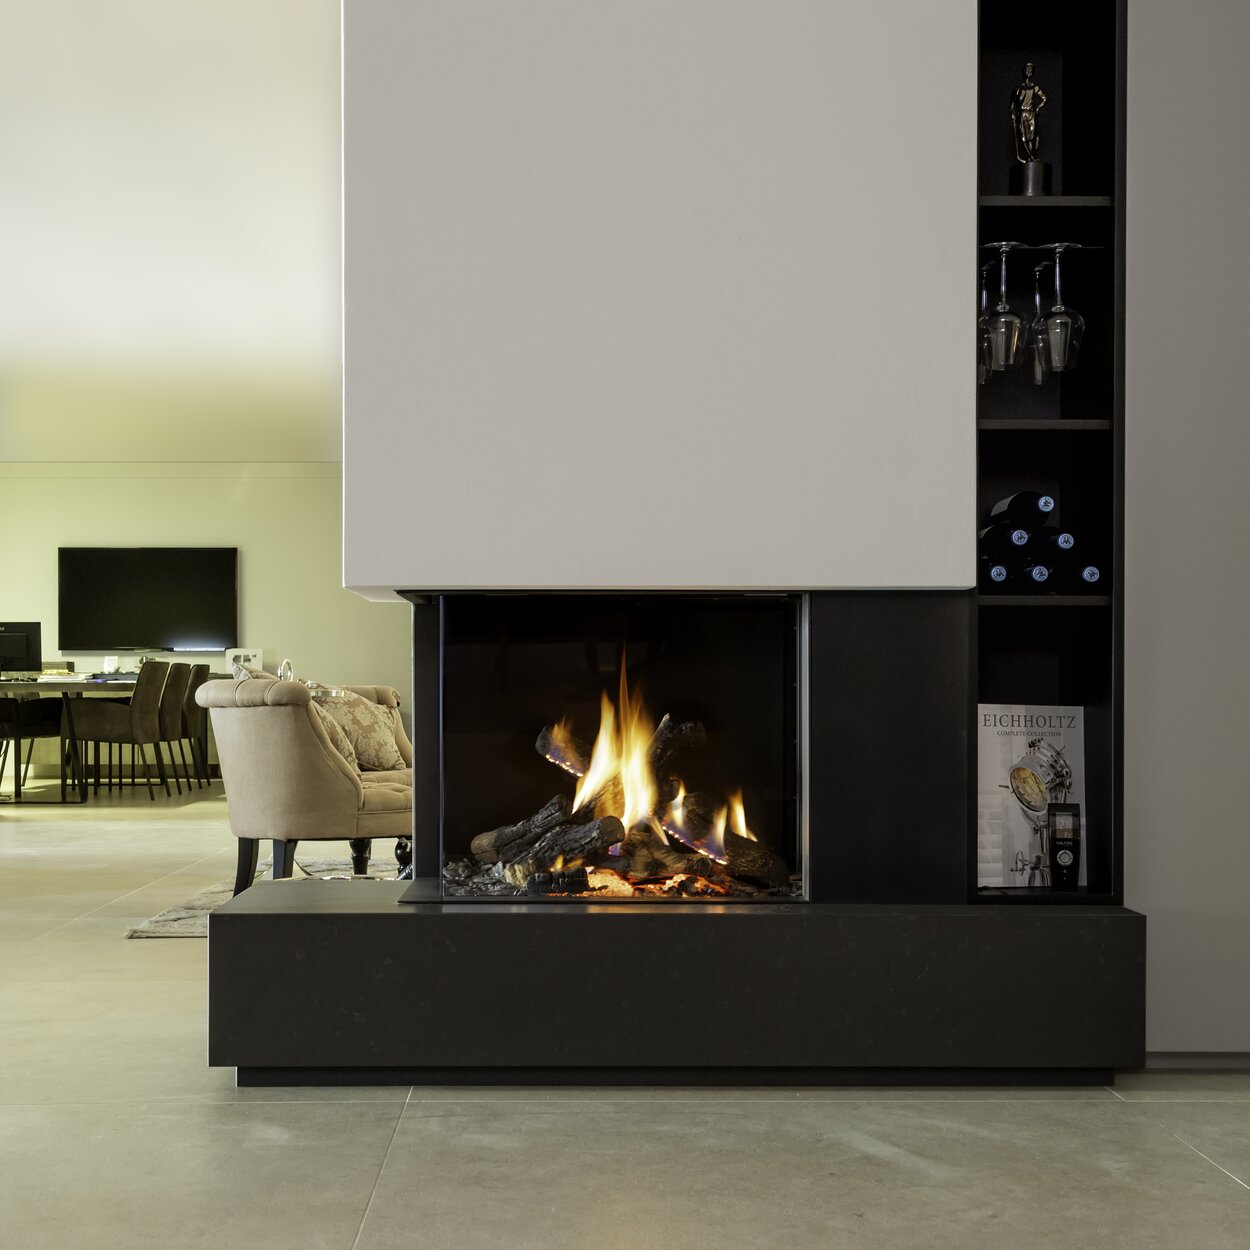 Gas fireplace GP65/55C 2-sided glazed on a black base unit with white panelling in a modern living room